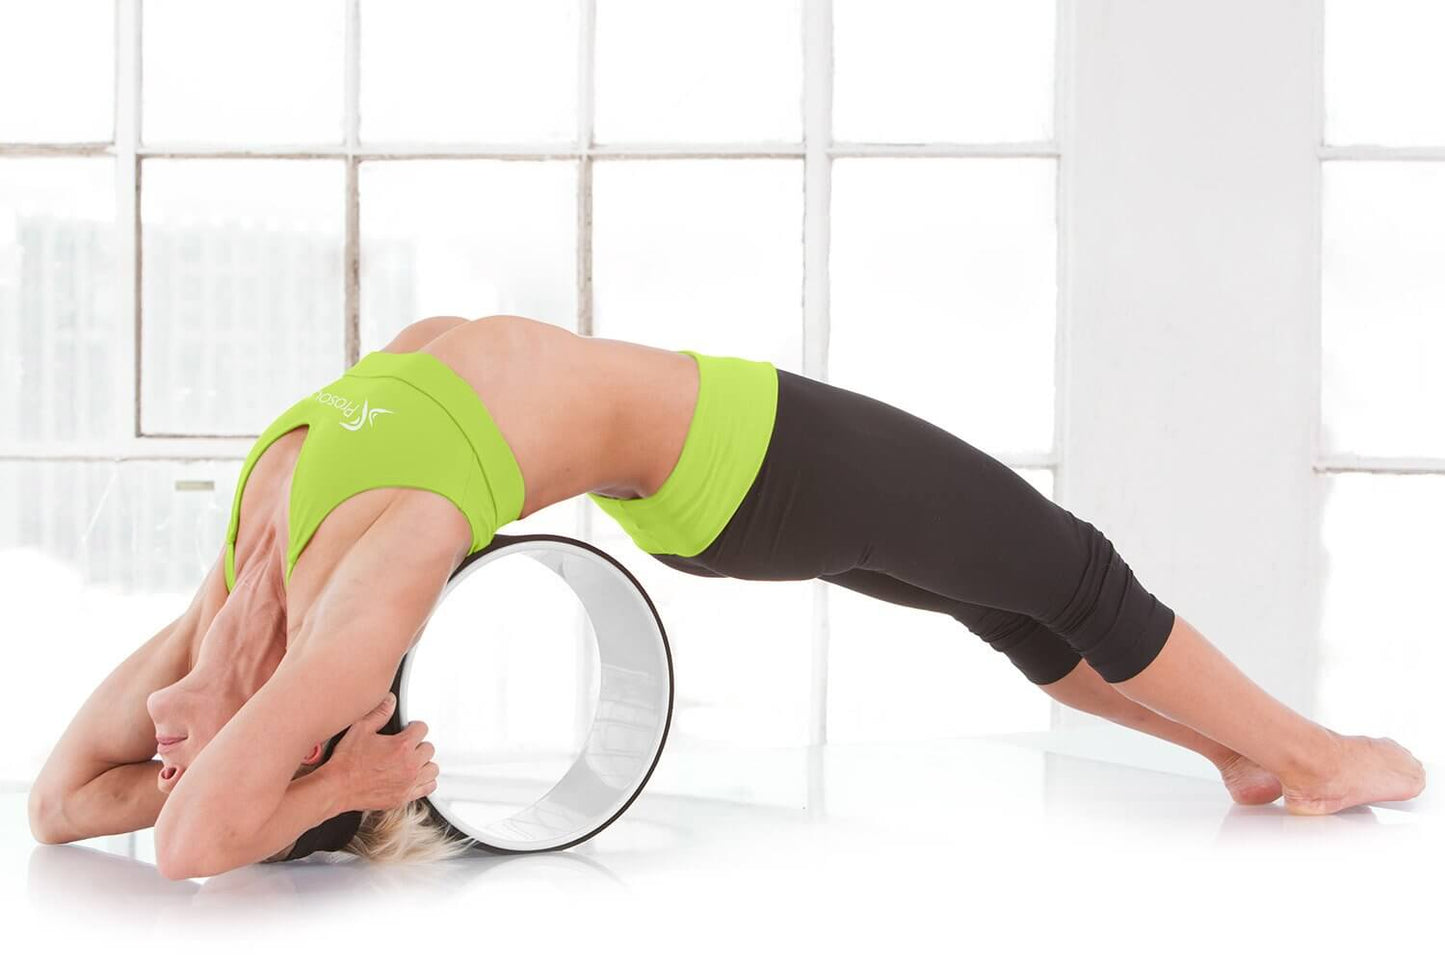 12" Yoga Wheel For Yoga Poses and Back Pain by Jupiter Gear